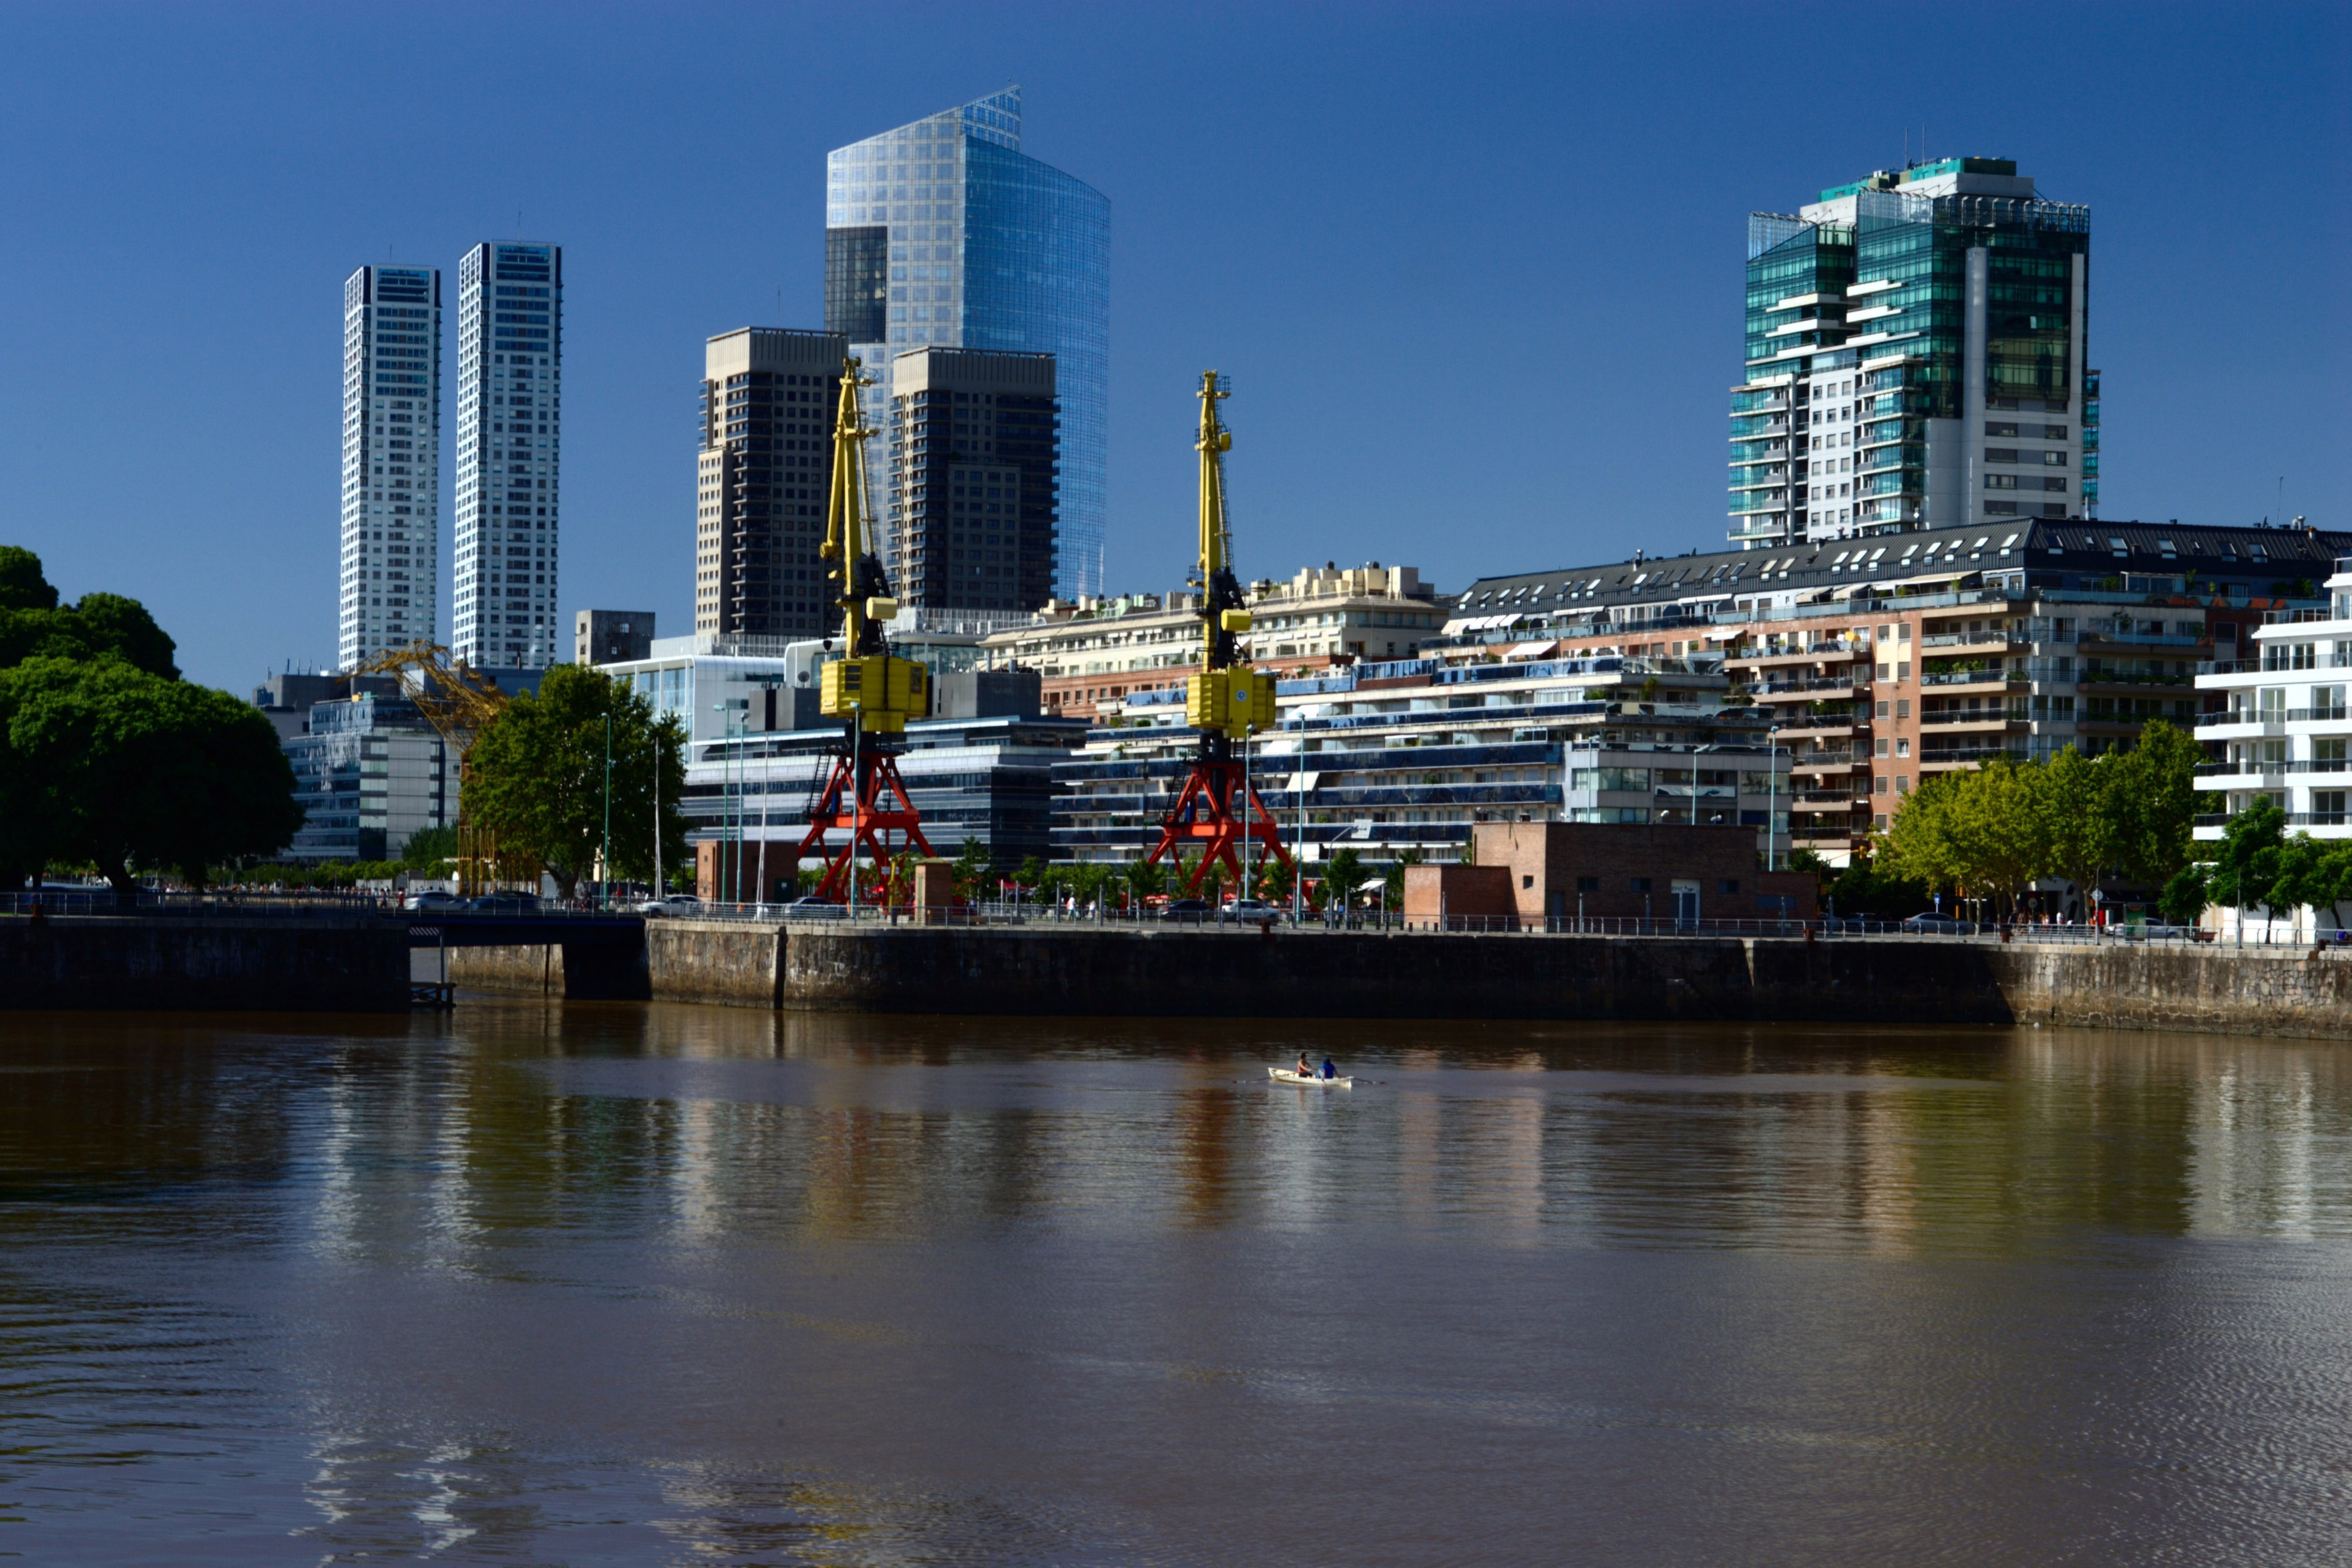 Skyline along the river in Buenos Aires, Argentina image - Free stock